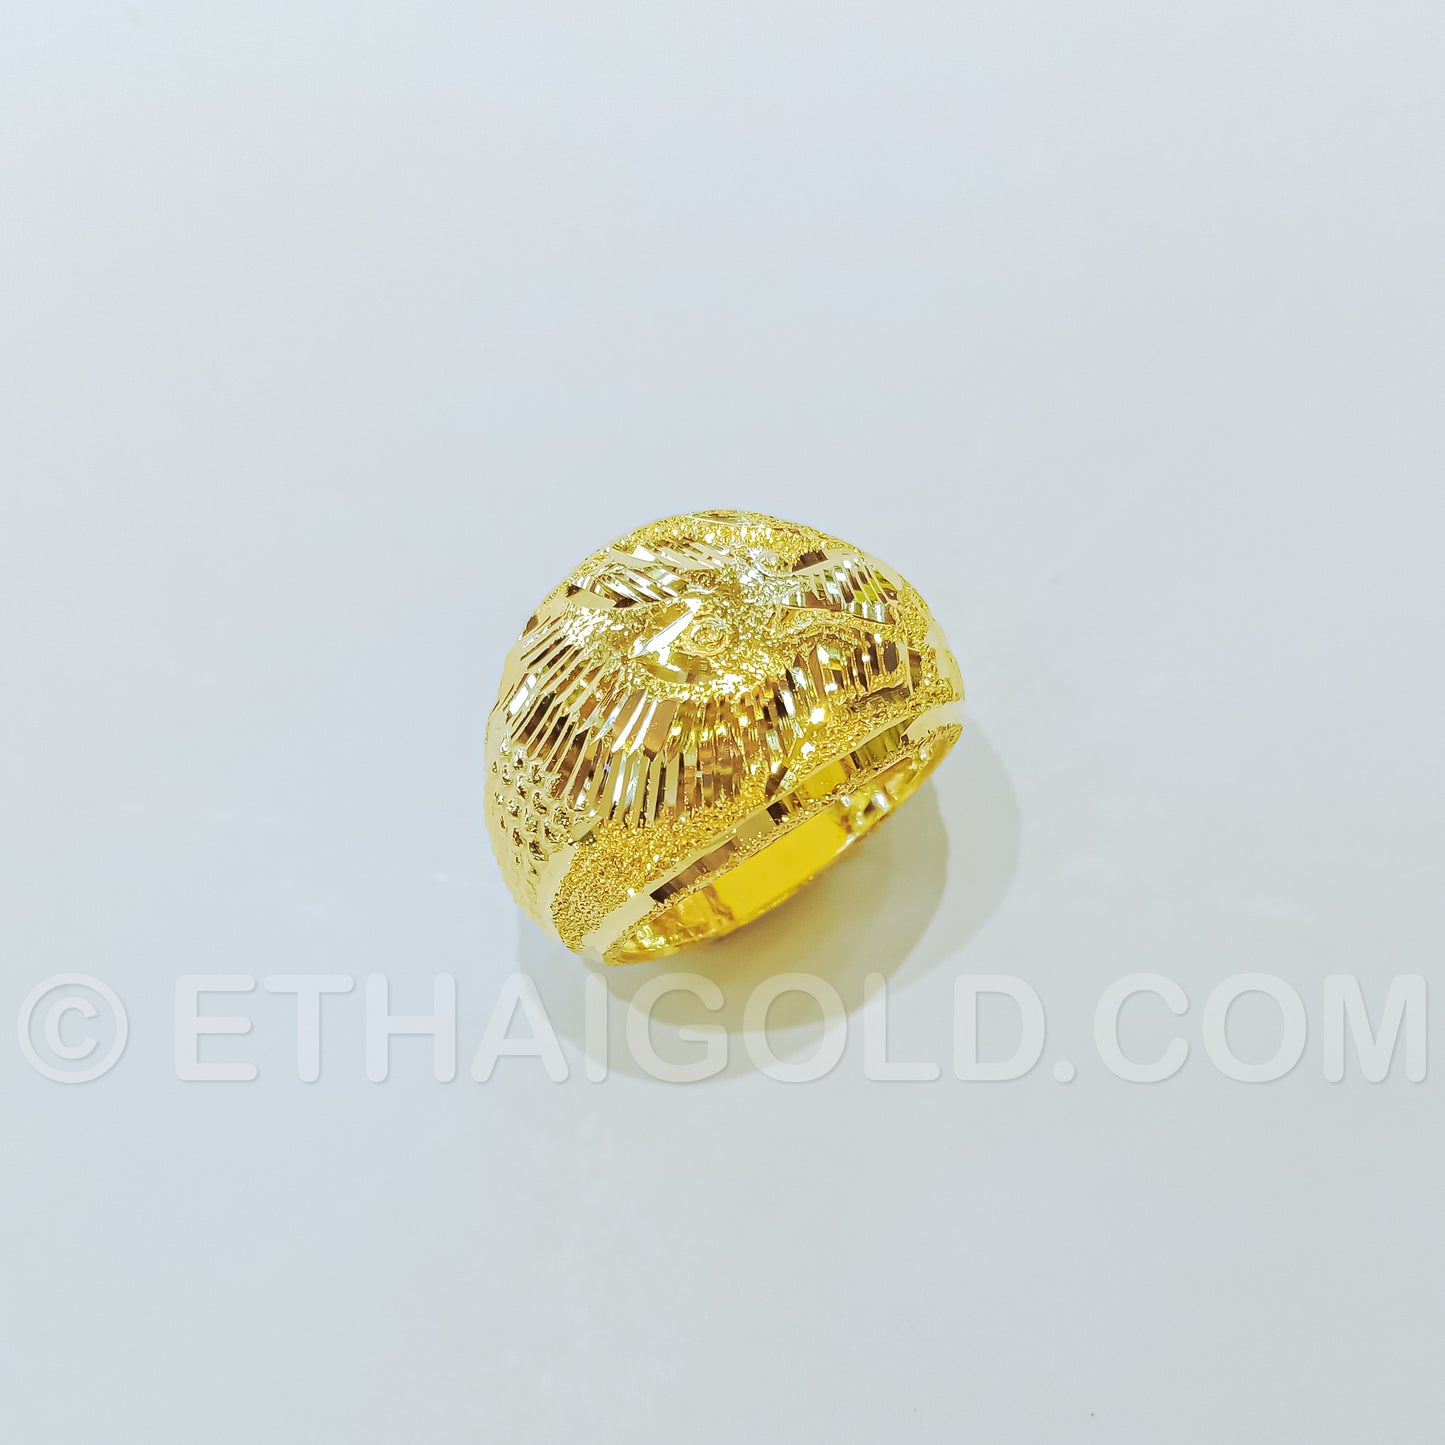 1/4 BAHT POLISHED SPARKLING DIAMOND-CUT HOLLOW LARGE DRAGON RING IN 23K GOLD (ID: R1401S)